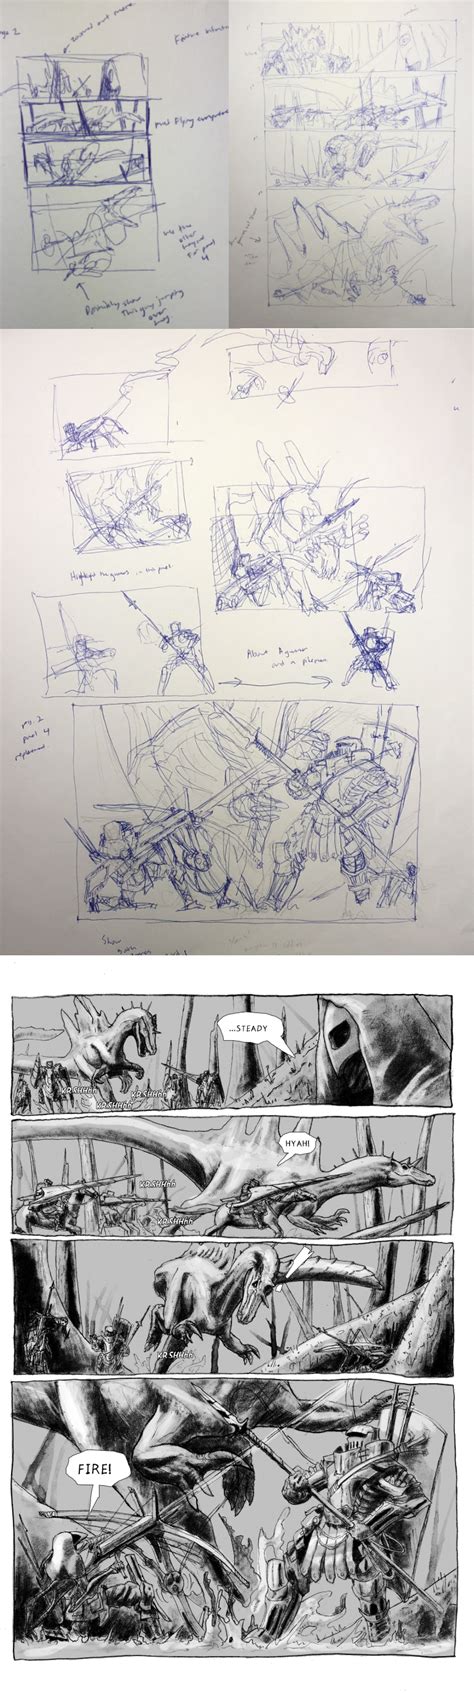 Titanomachy Issue 1 Page 2 Preview With Thumbnails By Tgping On Deviantart